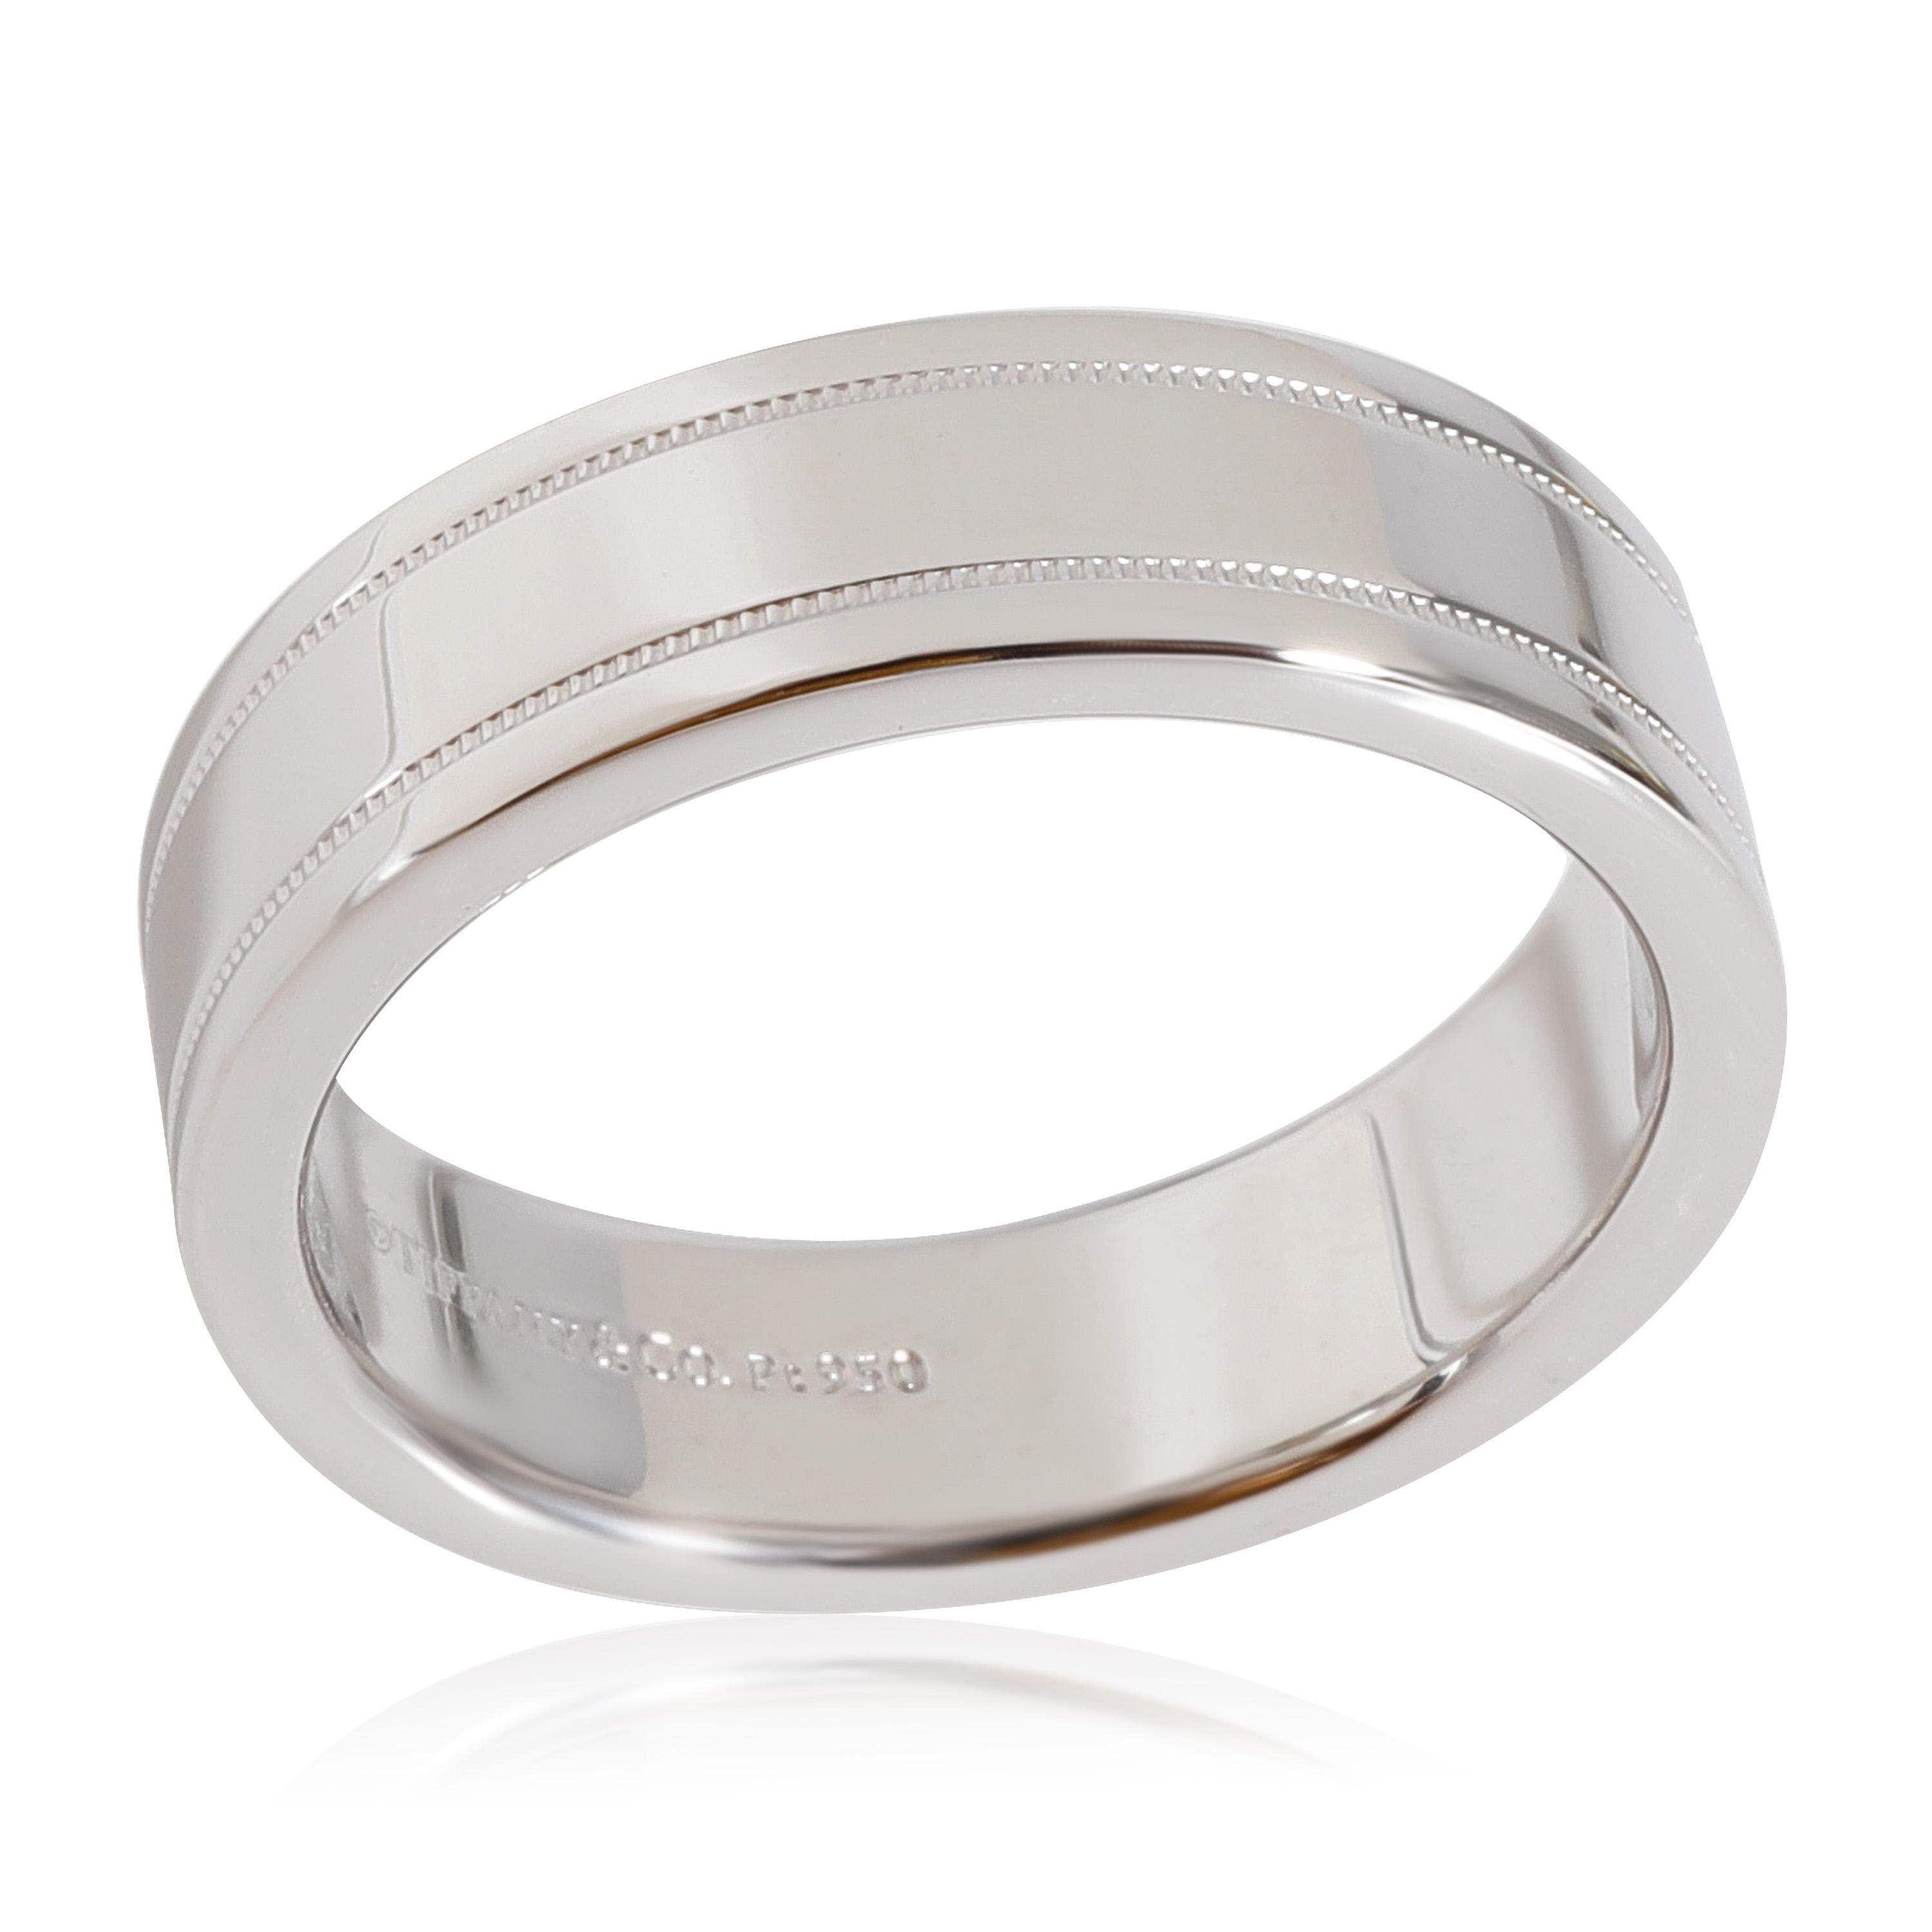 Tiffany & Co. Essentials Band in 950 Platinum

PRIMARY DETAILS
SKU: 123110
Listing Title: Tiffany & Co. Essentials Band in 950 Platinum
Condition Description: Retails for 2500 USD. In excellent condition and recently polished. Ring size is